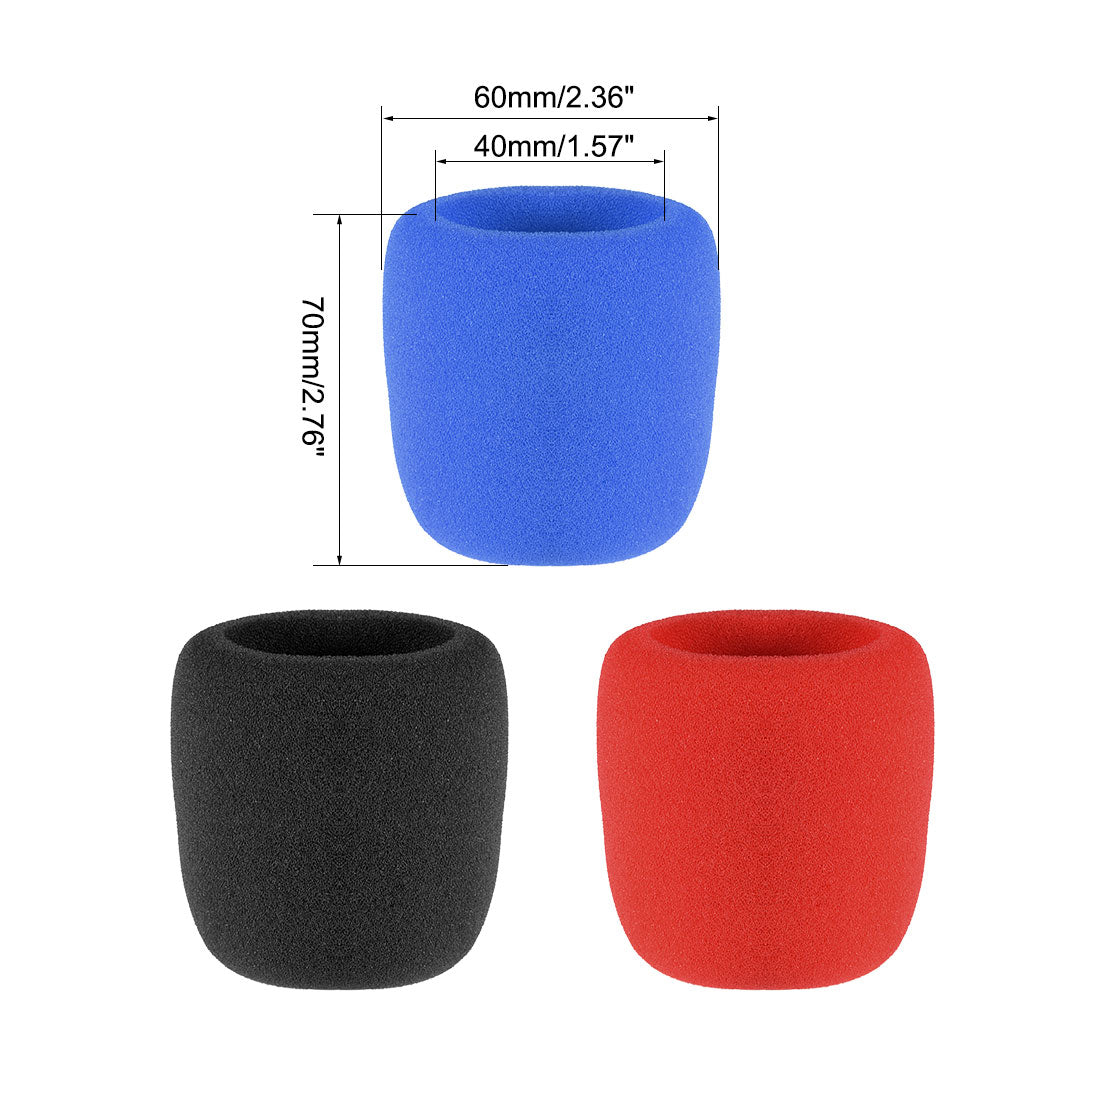 uxcell Uxcell 3PCS Thicken Sponge Foam Mic Cover Handheld Microphone Windscreen Black Red Blue for KTV